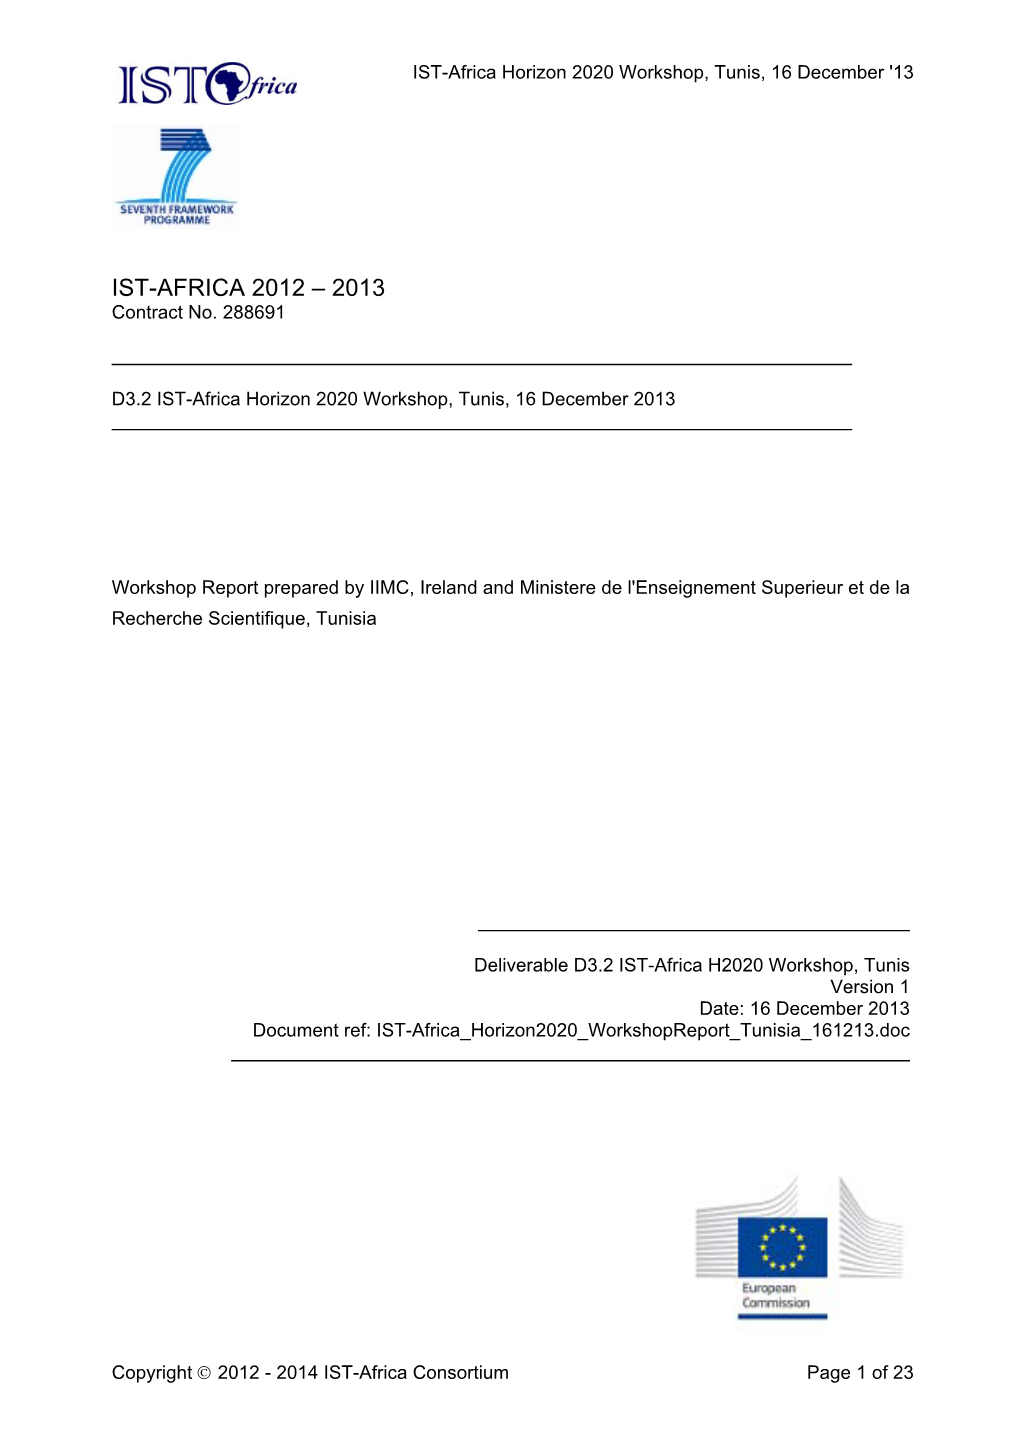 IST-AFRICA 2012 – 2013 Contract No